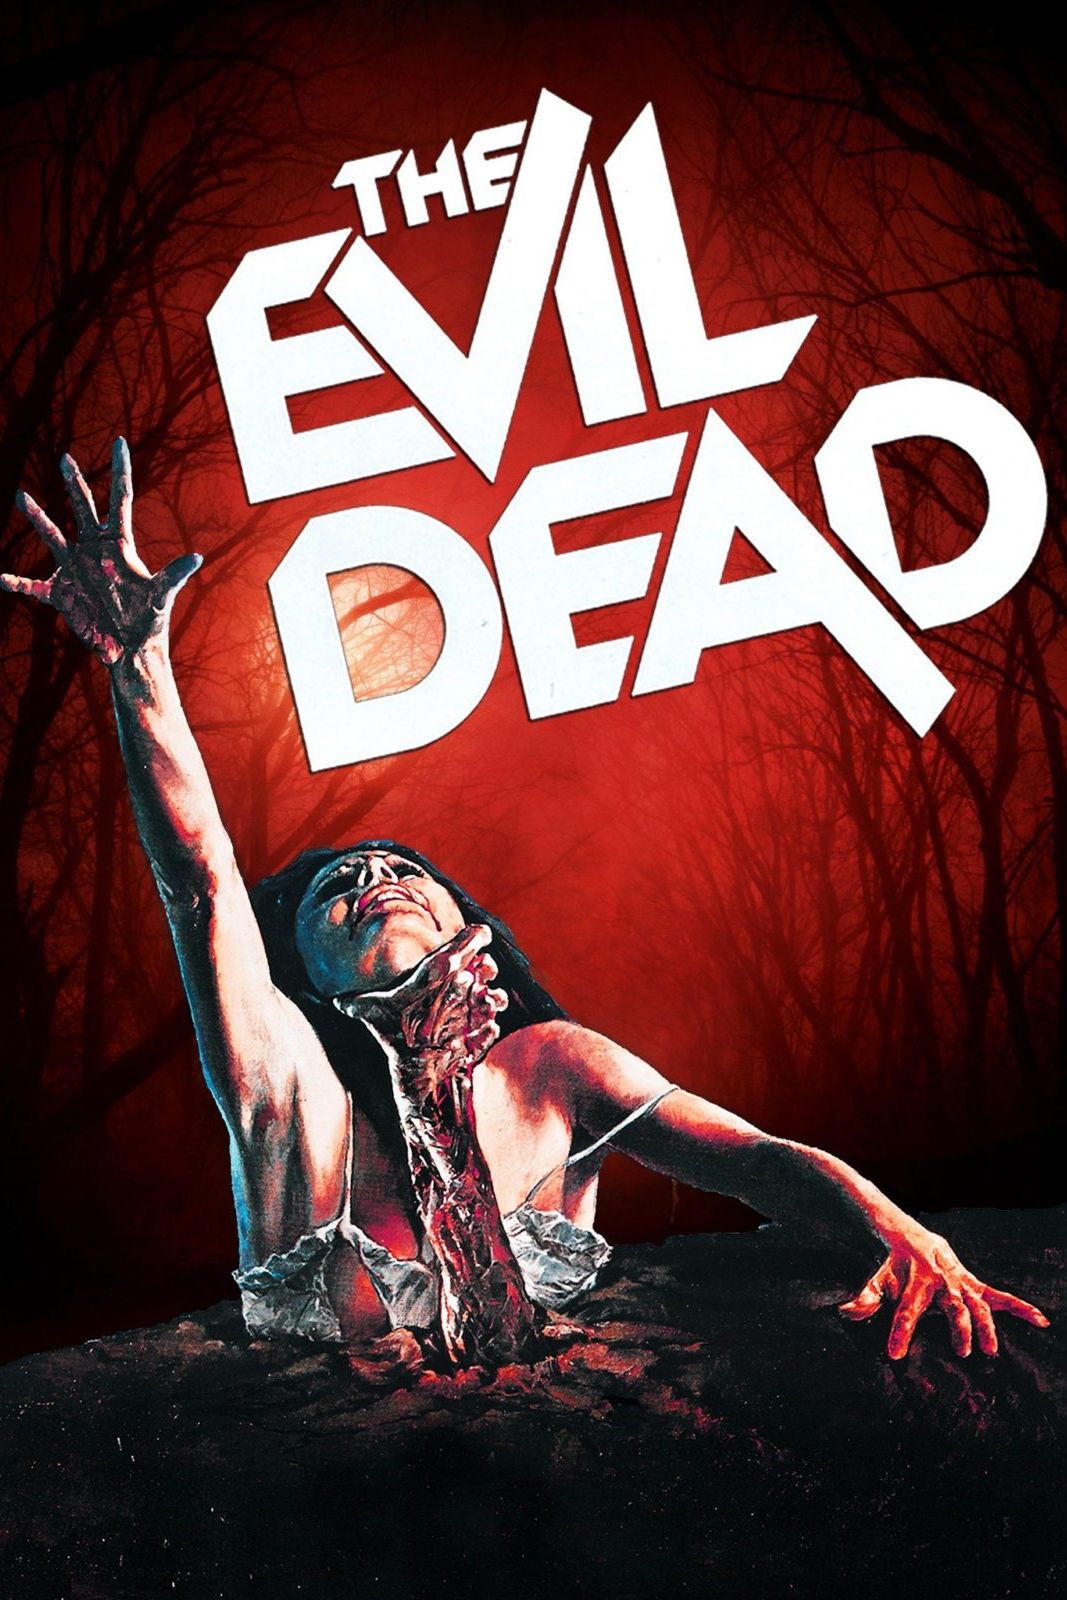 Second Evil Dead Spinoff Movie In The Works From Sam Raimi’s Production Company